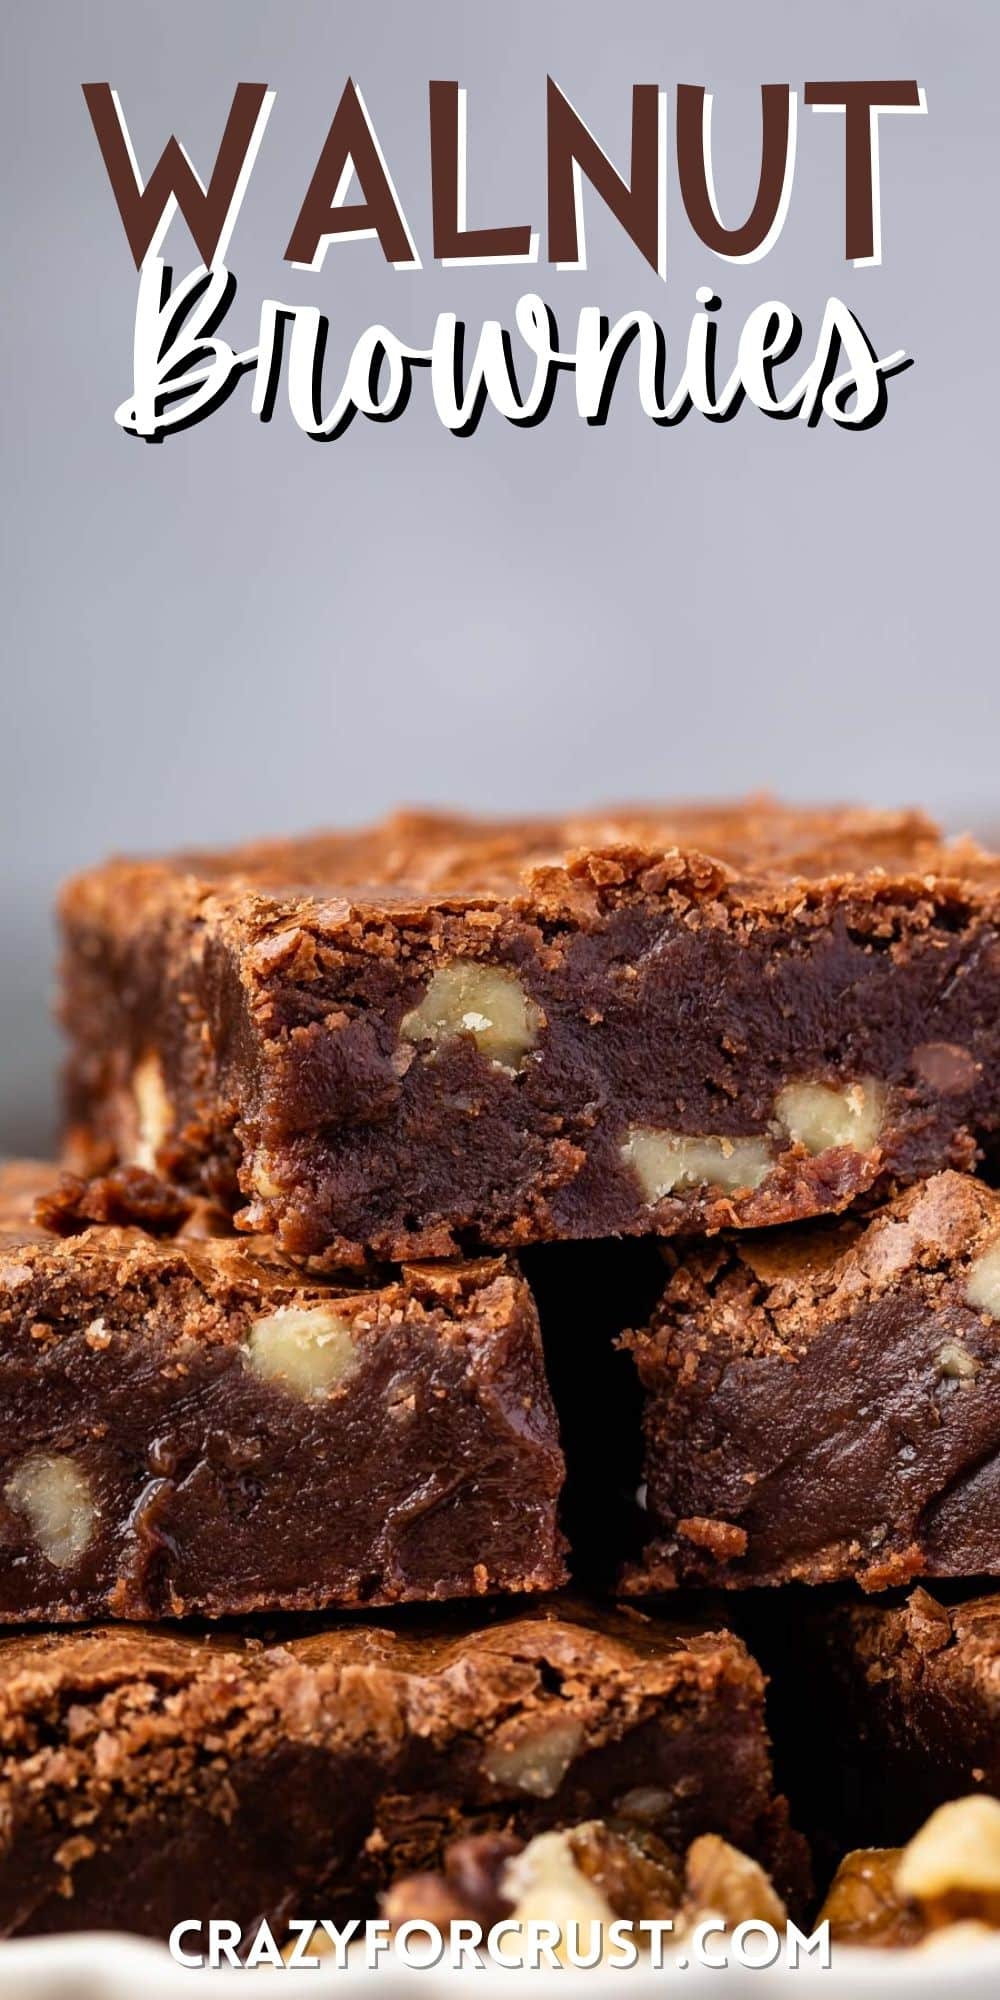 stacked brownies with walnuts baked in and words on the photo.